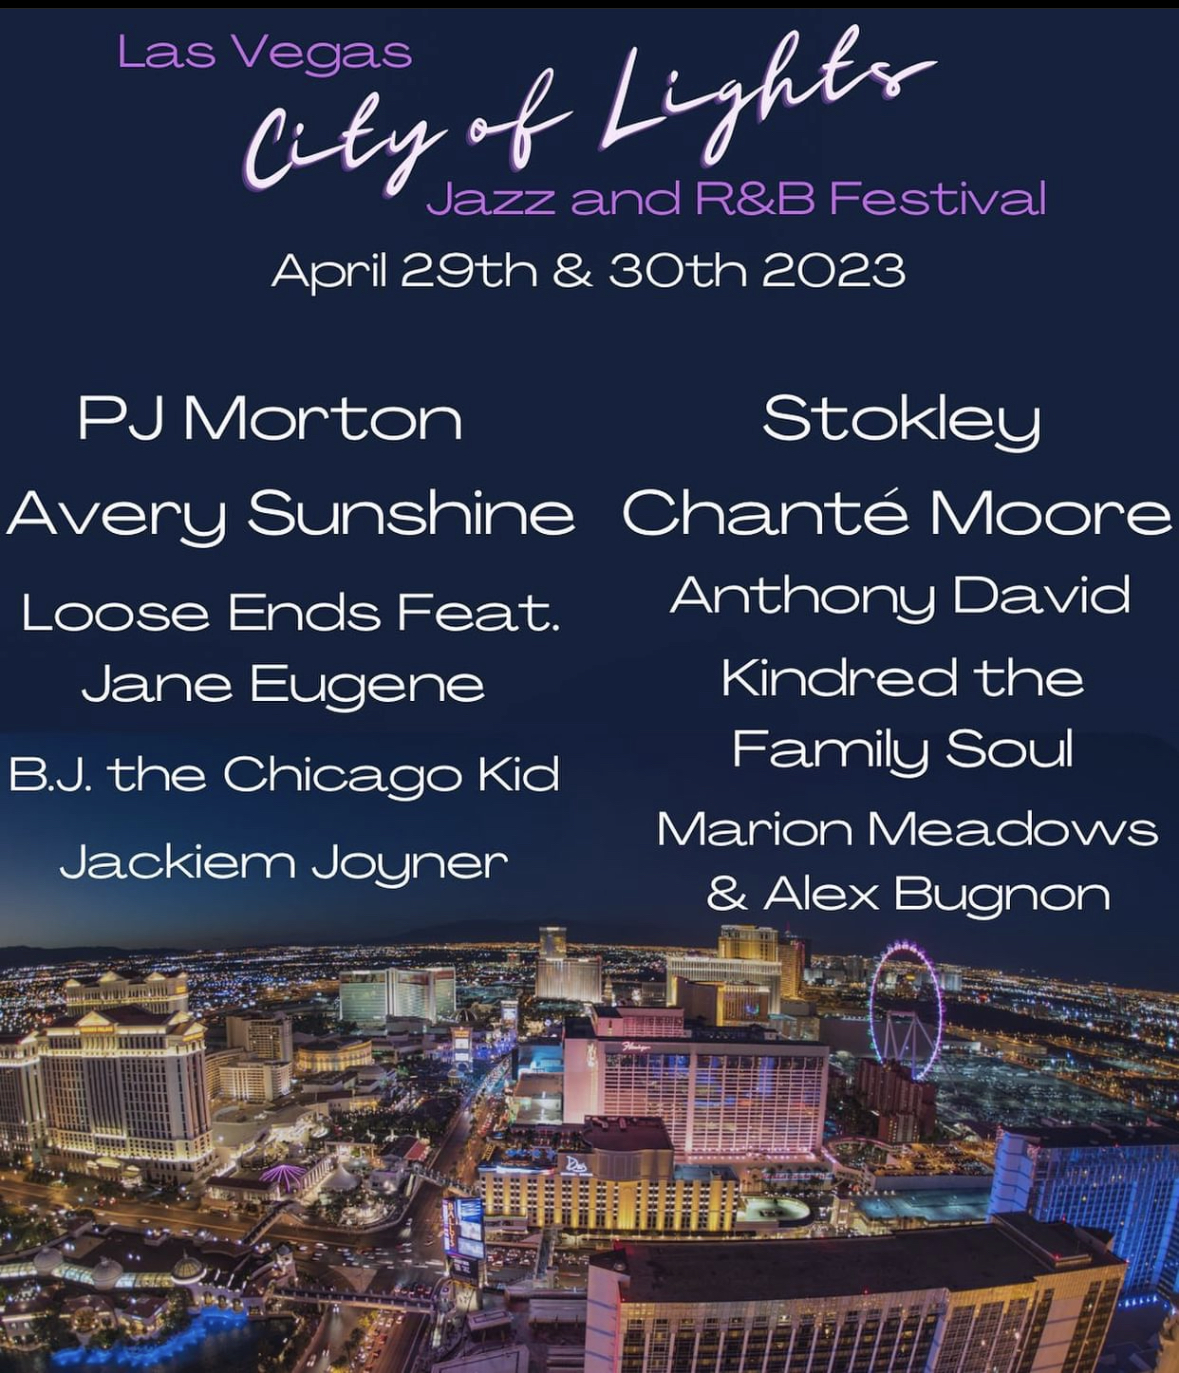 Las Vegas City of Lights Jazz and R&B Festival at Clark County